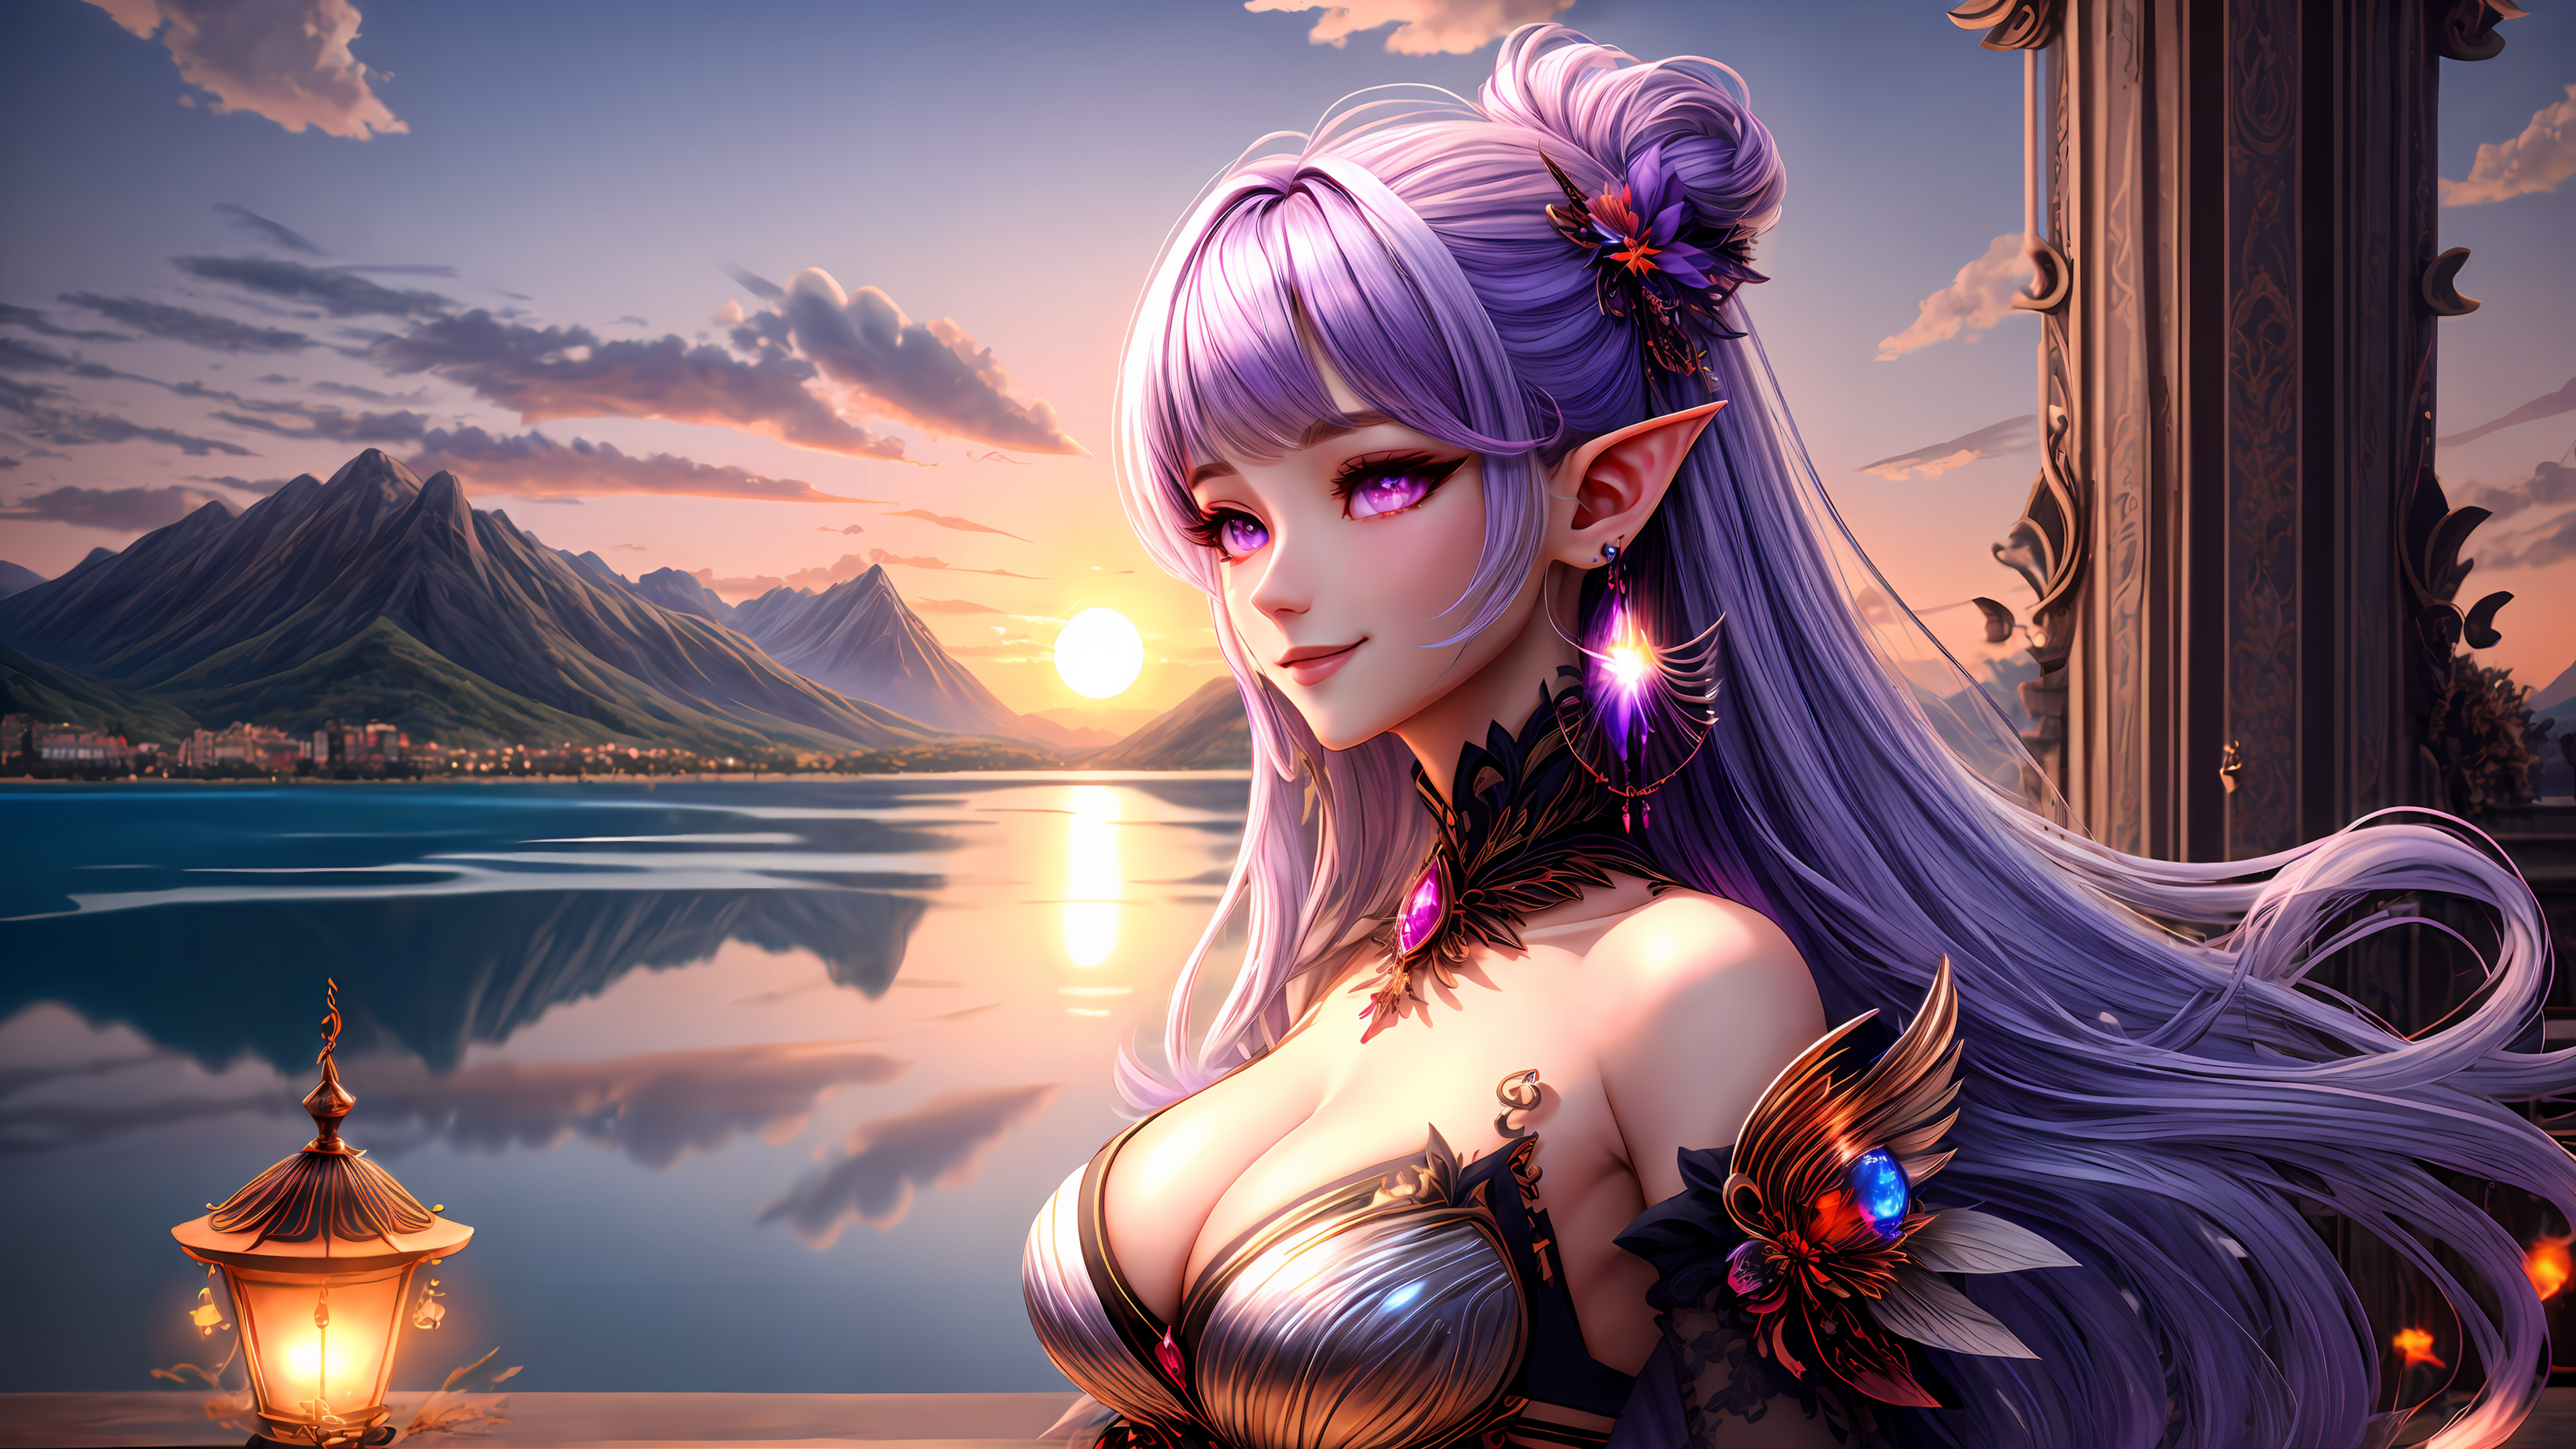 General 3840x2160 AI art women elf girl purple hair purple eyes cleavage fantasy art portrait lake lantern detailed character design  sunset sky water mountains horizon nature earring pointy ears comforting idyllic bare shoulders 4K Stable Diffusion photopea DeviantArt smiling big boobs reflection clouds long hair